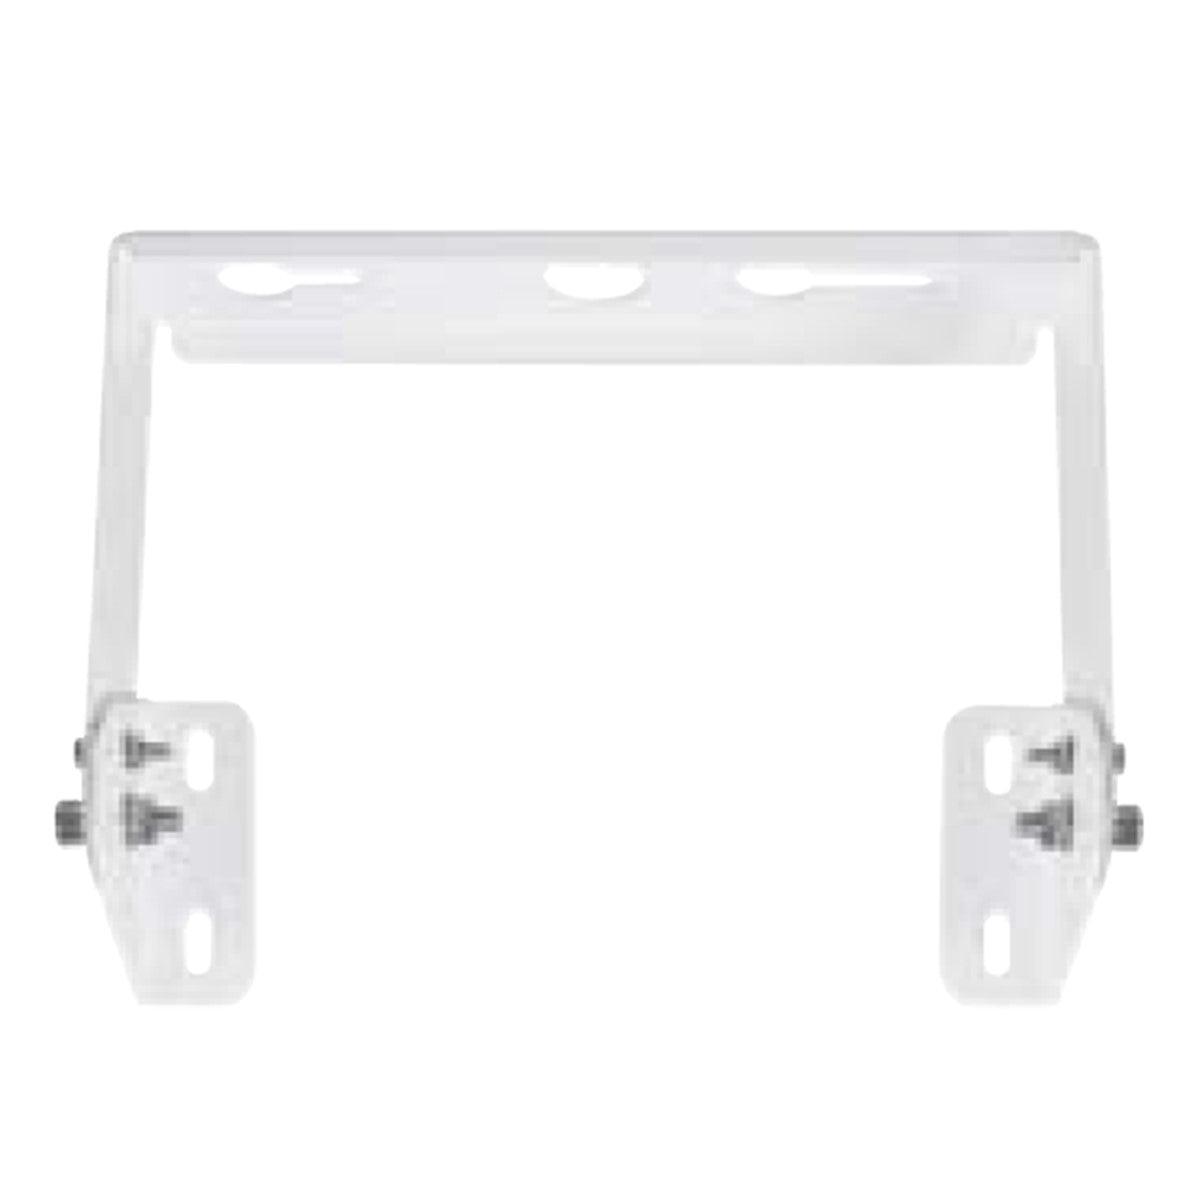 White Surface/Pendant Mount Bracket, For 100-150W High Bays